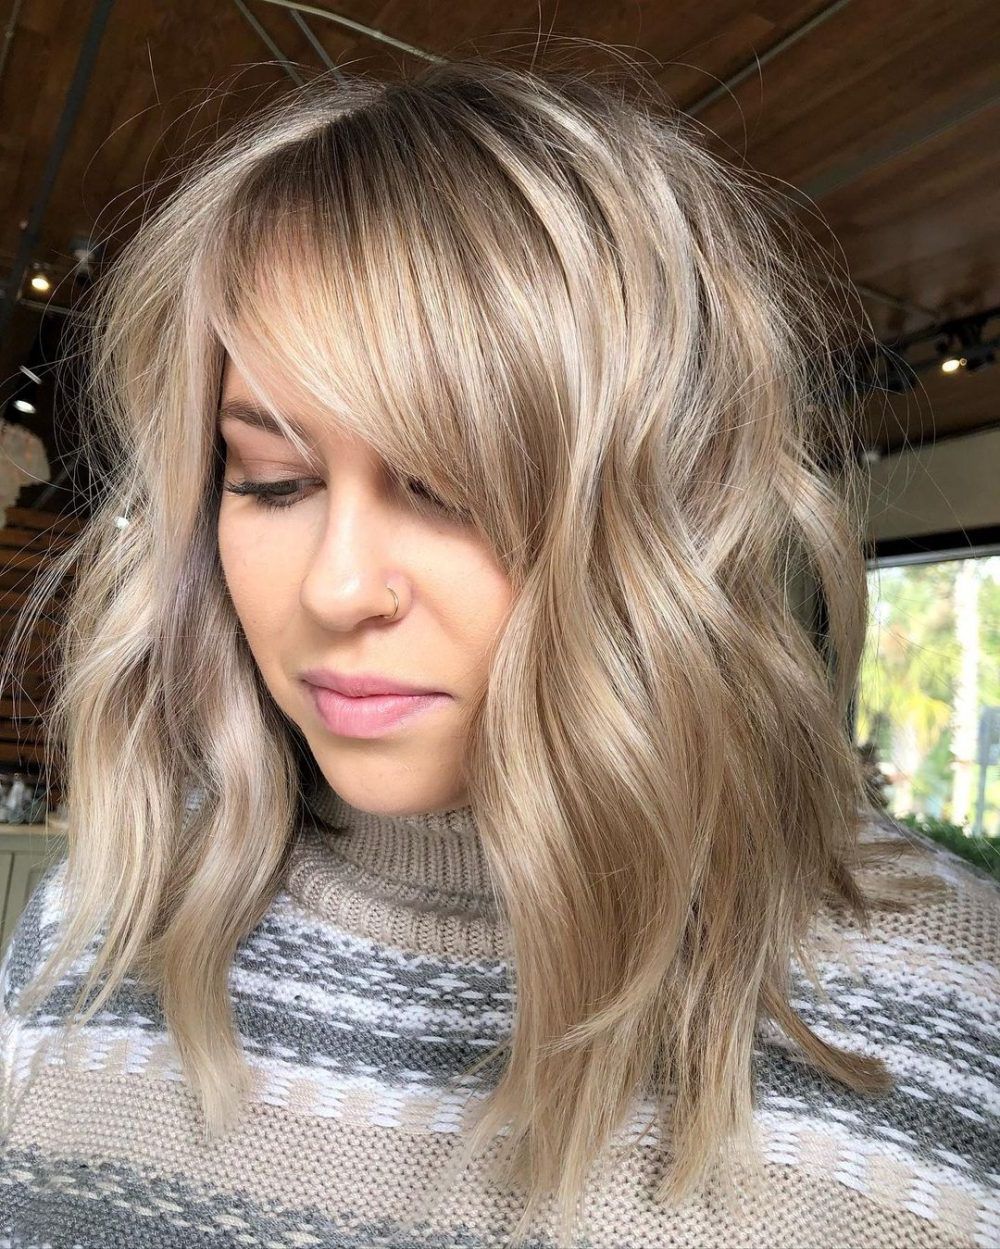 63 Side Swept Bangs To Try When You're Bored With Your Hair | Hair Lengths,  Bangs With Medium Hair, Side Bangs Hairstyles Throughout Most Recent Highlighted Hair With Side Bangs (View 15 of 18)